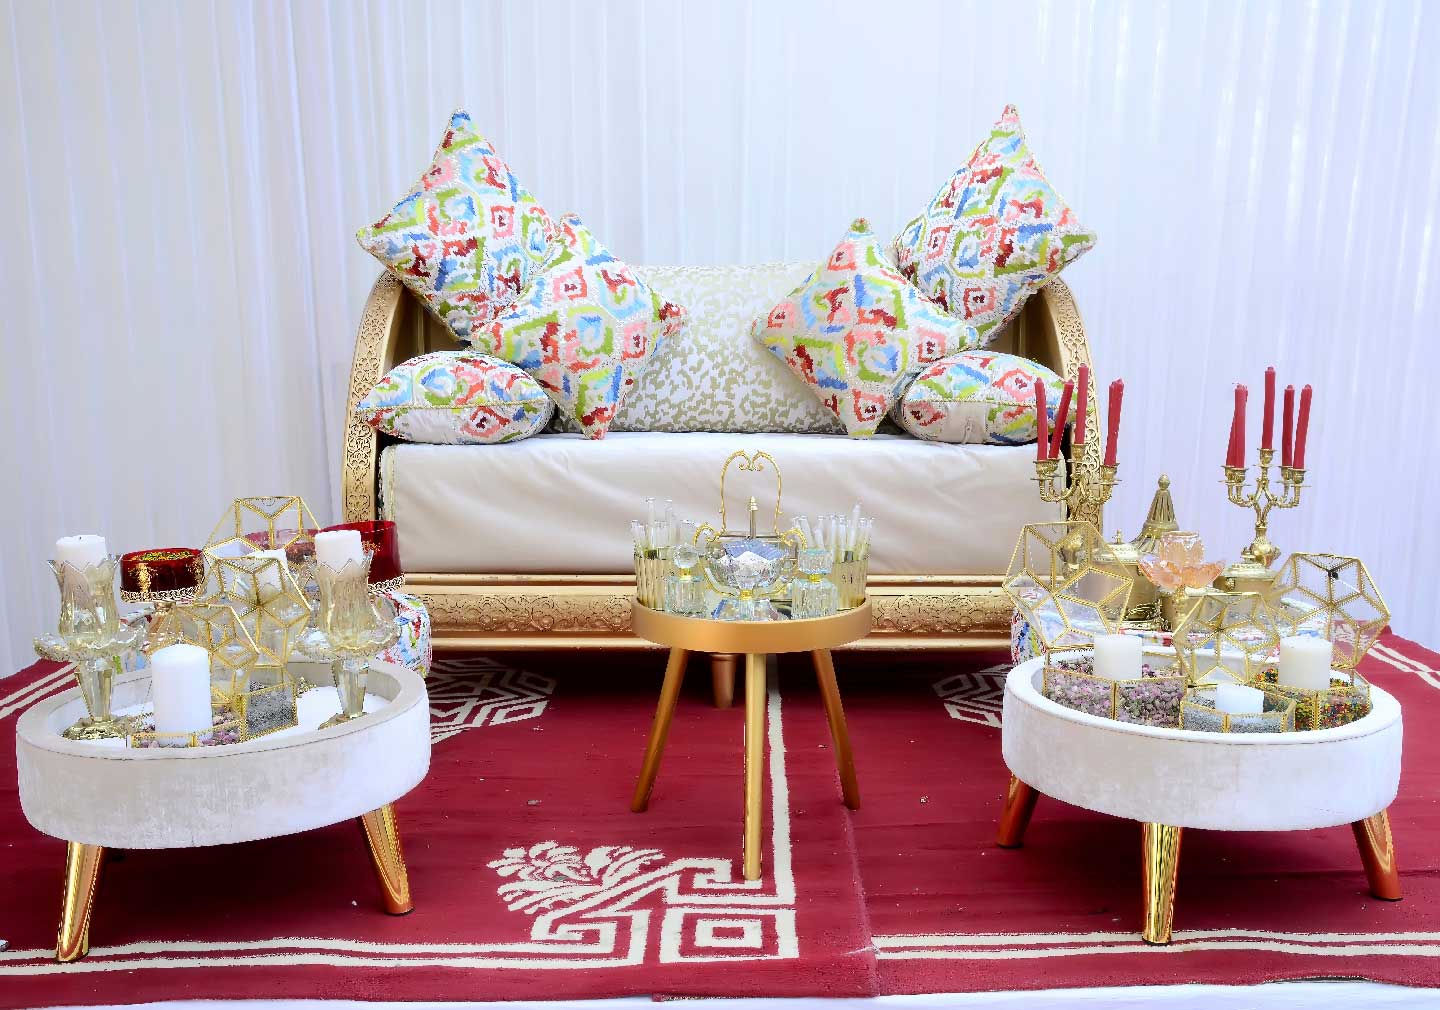 Elements of Moroccan Design Theme